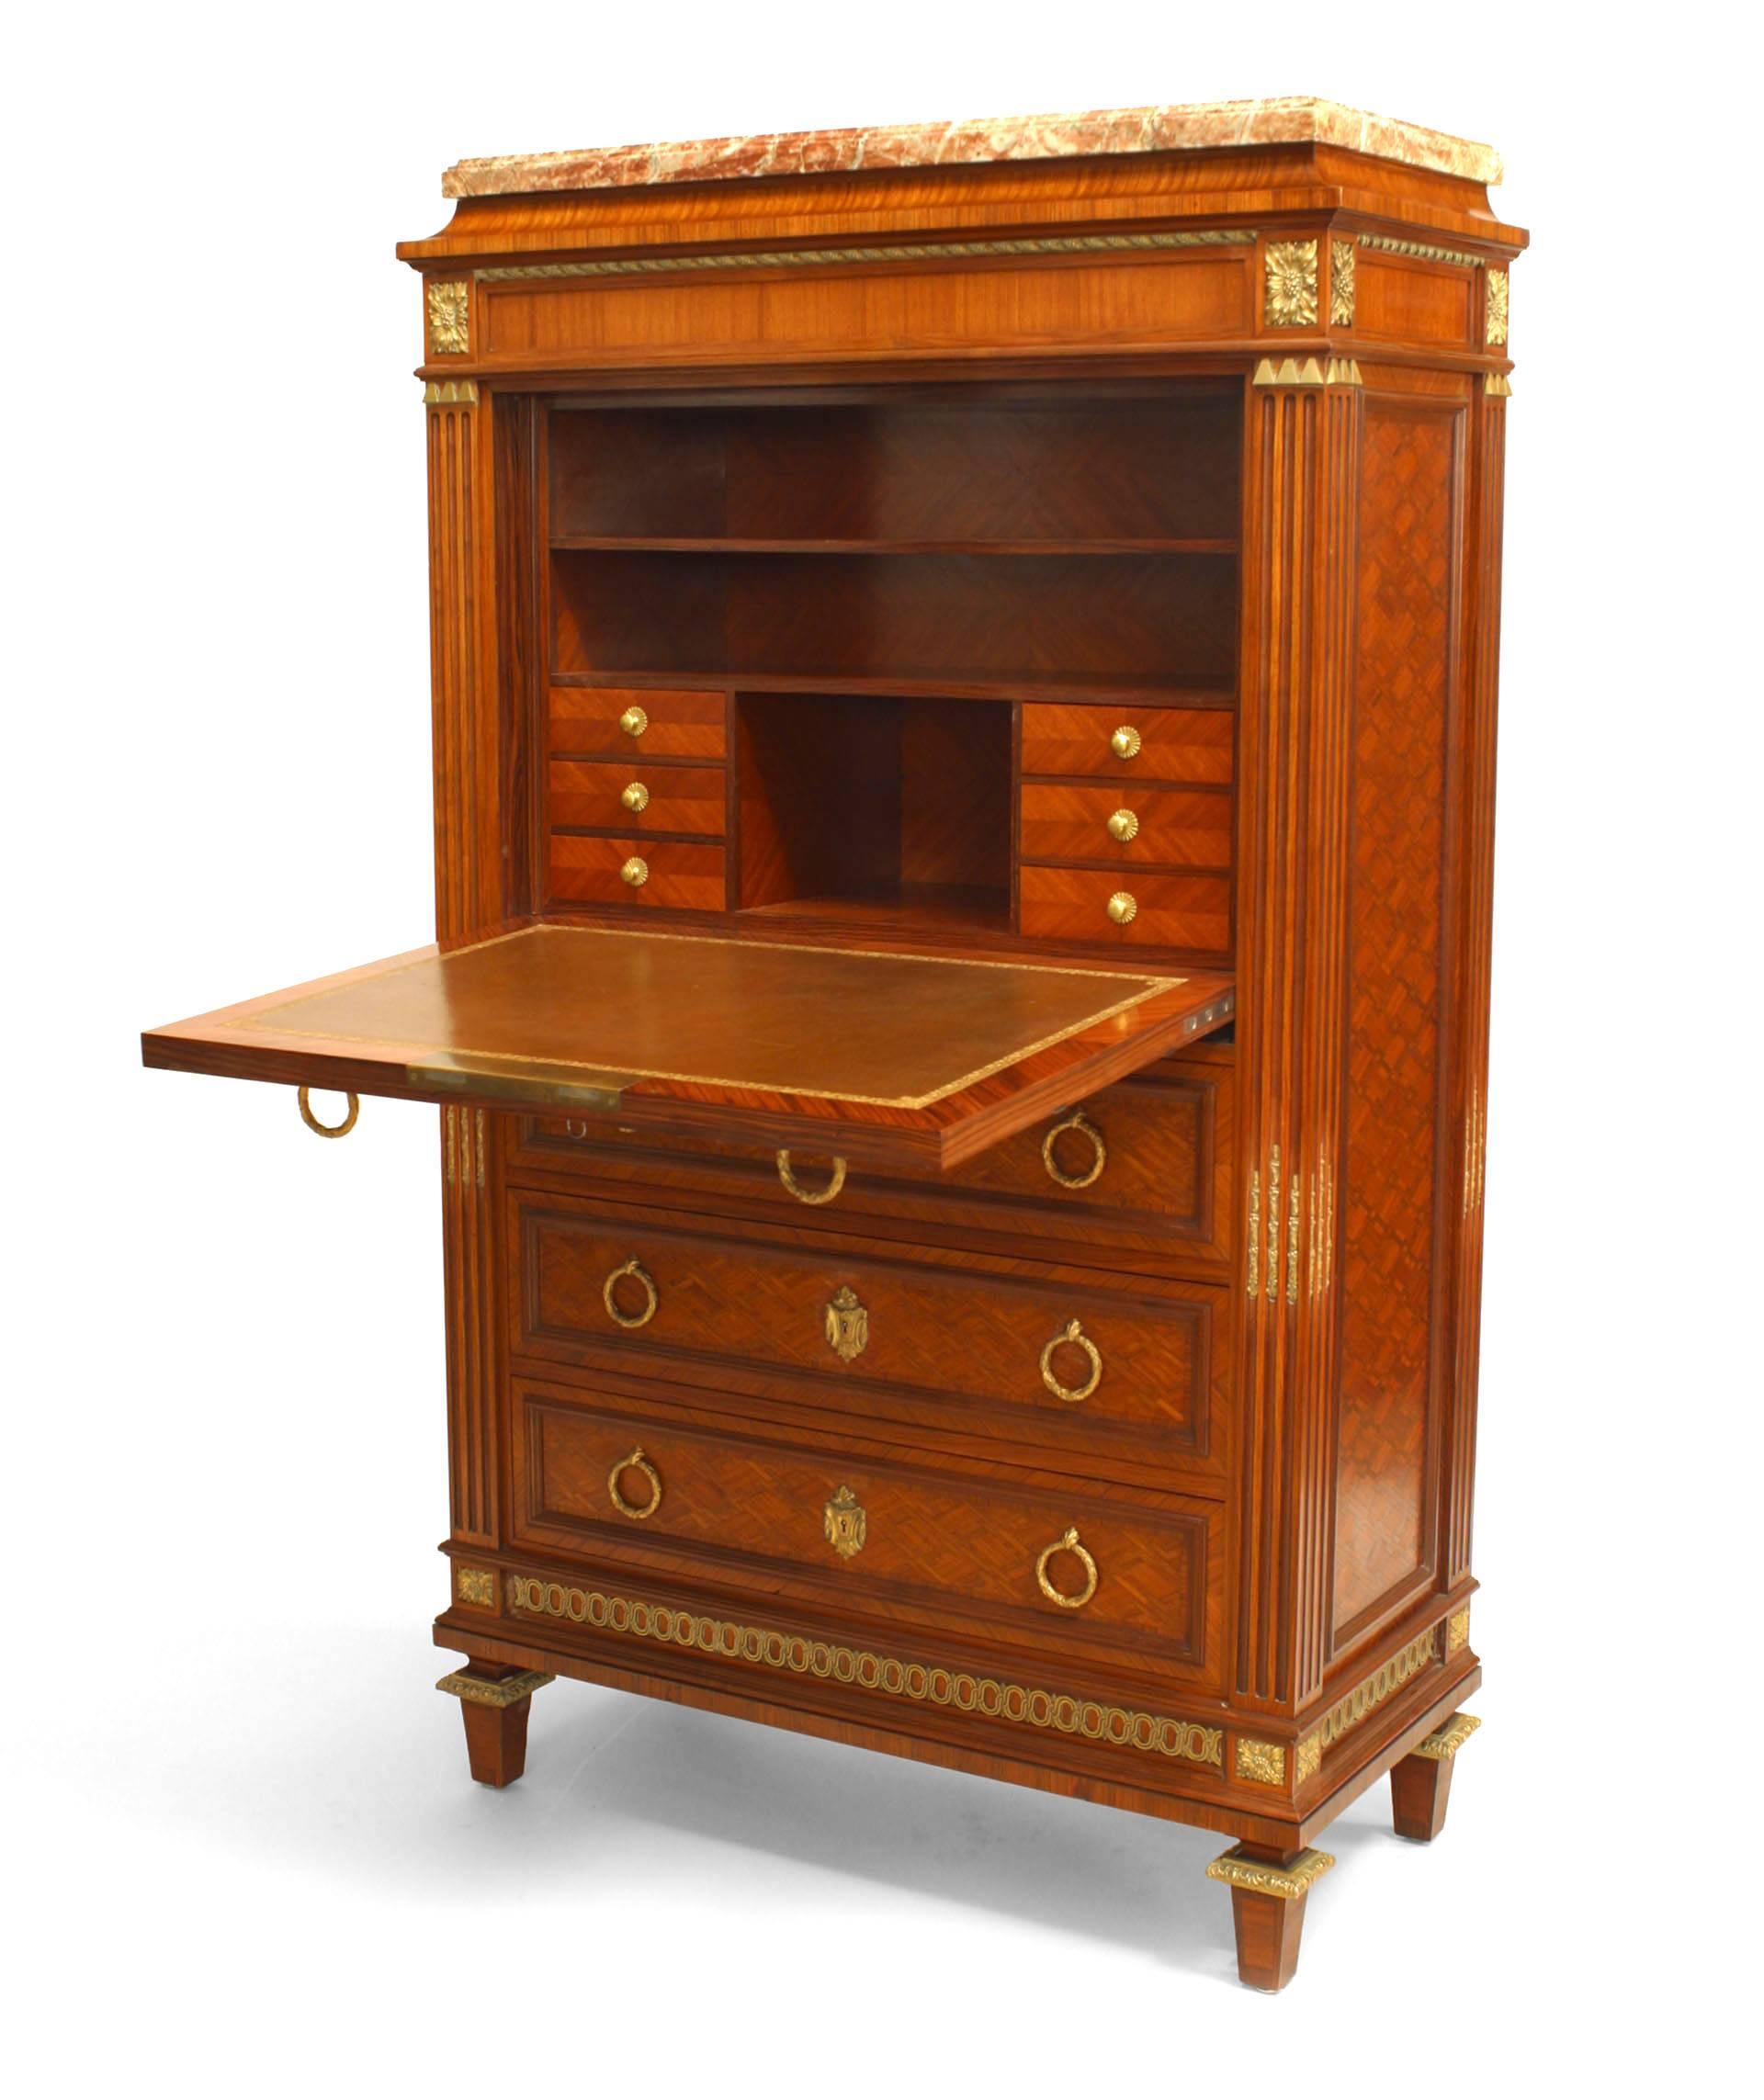 French Louis XVI style 19th century parquetry inlaid drop front secretary (abattant) with gilt bronze trim and ring hands with four drawers below a fitted interior with a leather writing surface.
 